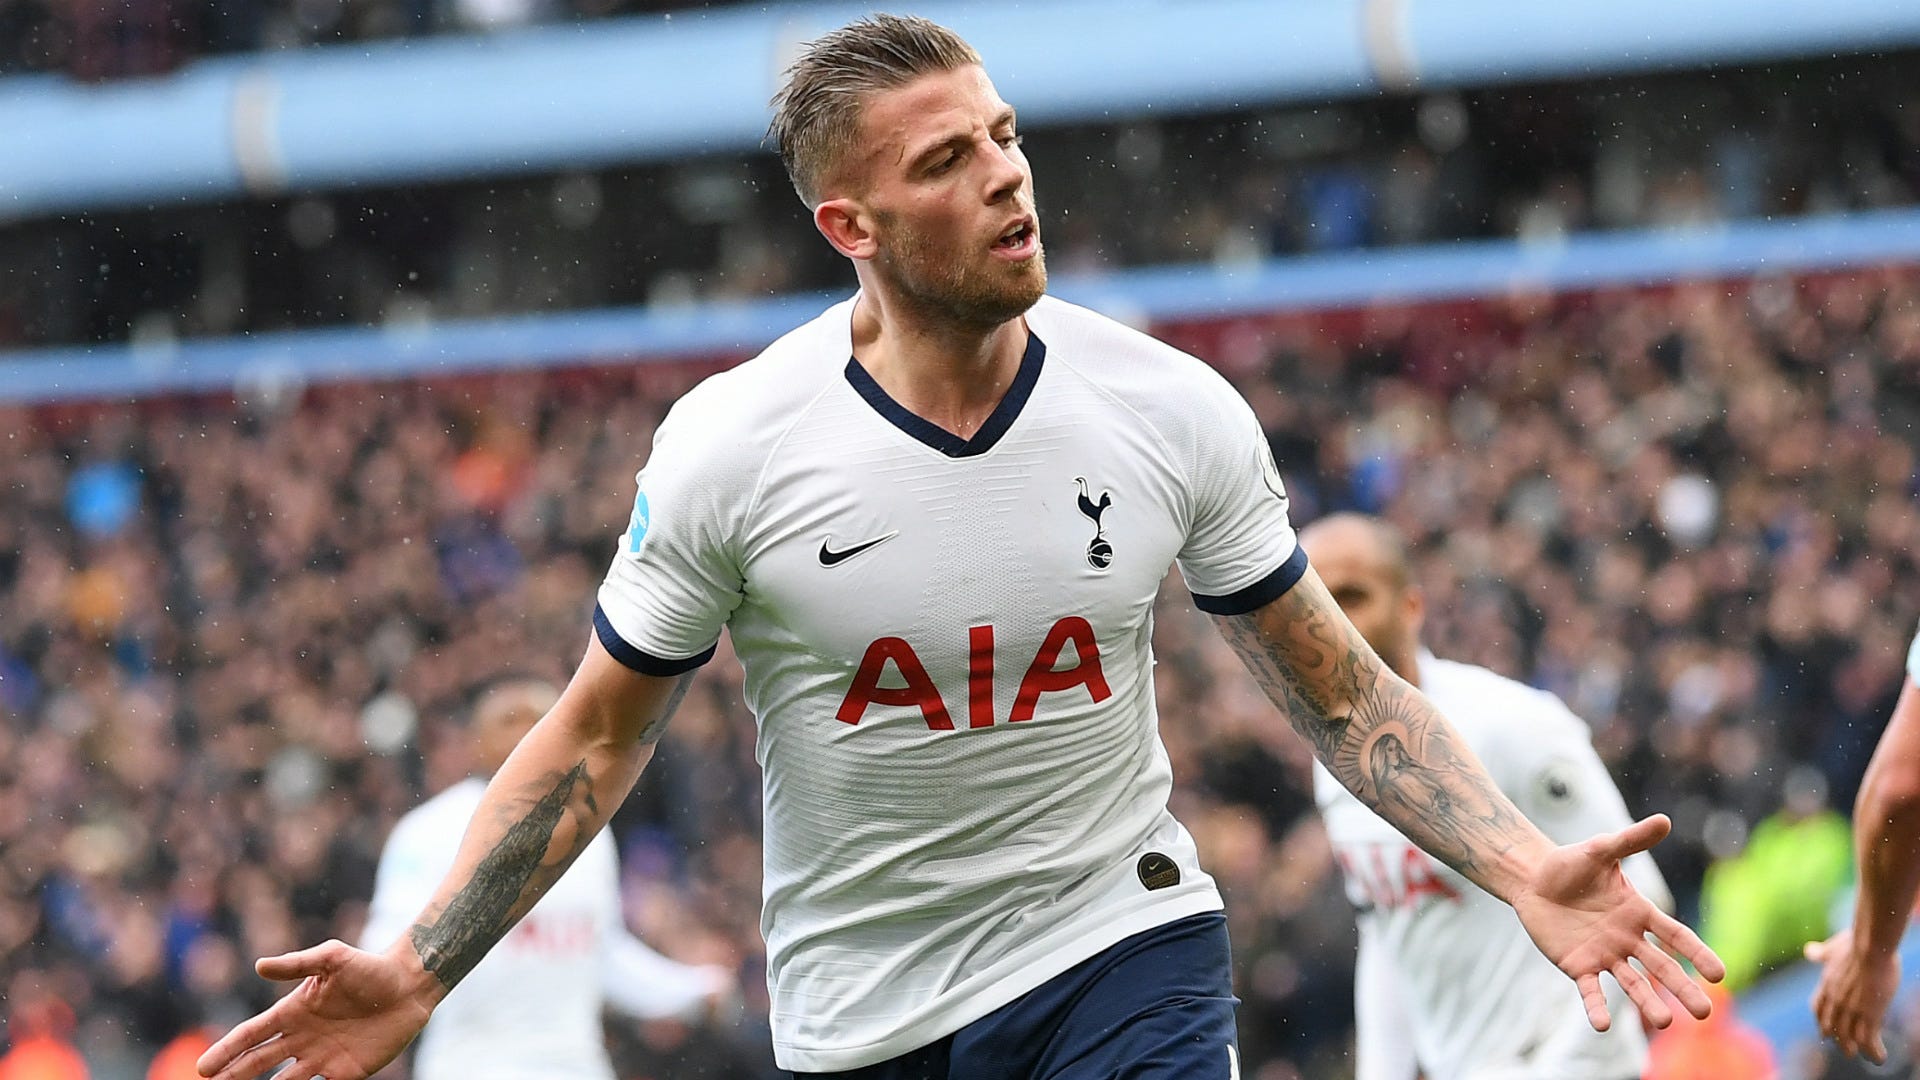 It was not like a holiday' - Spurs are ready after tough training in  lockdown, says Alderweireld | Goal.com English Qatar